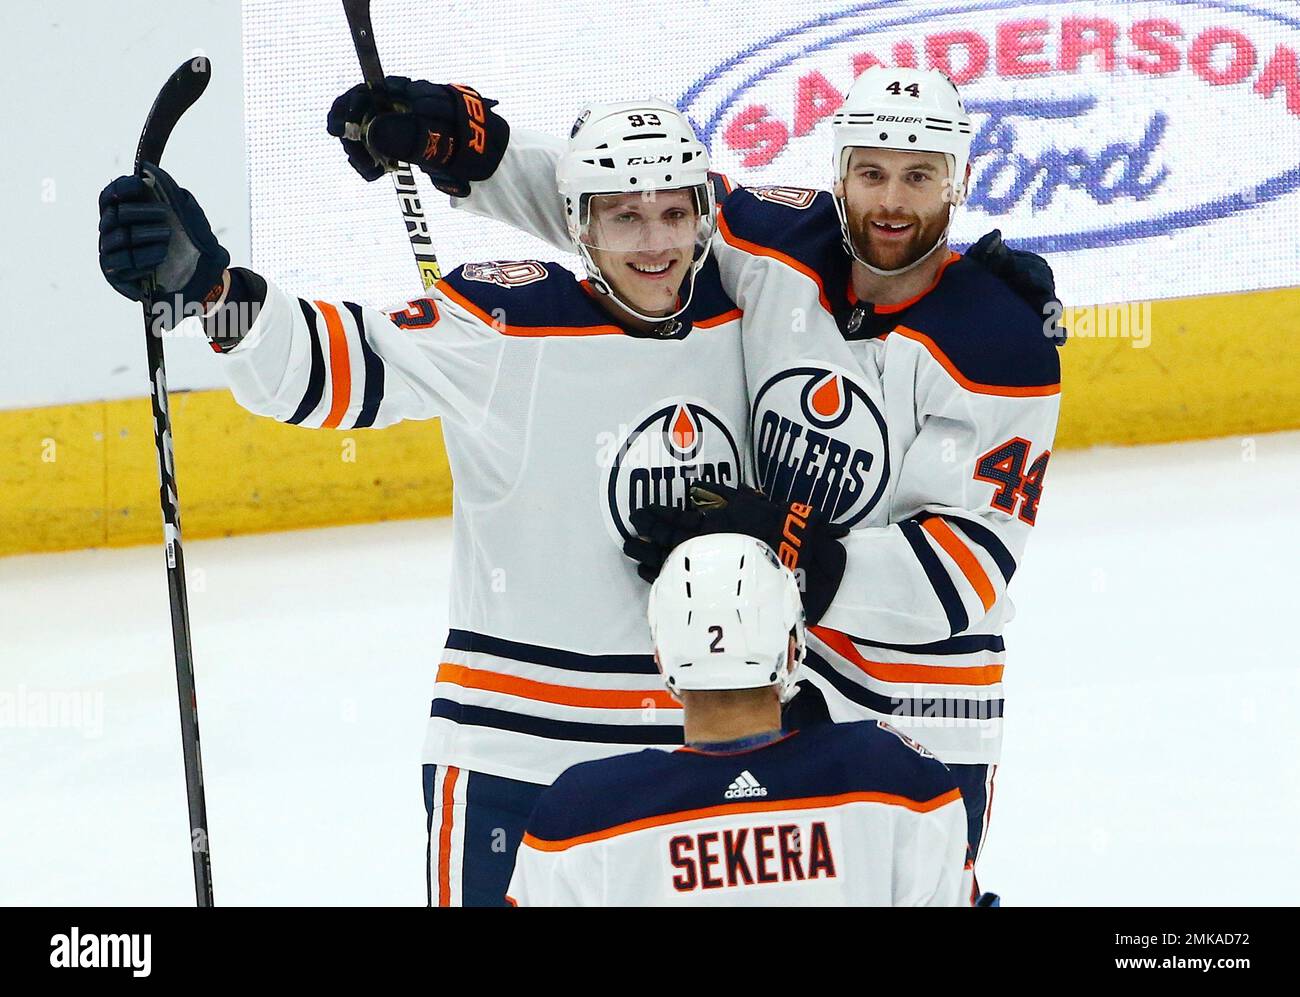 Edmonton Oilers defenseman Matt Benning (83) celebrates his goal against  the Arizona Coyotes with Oilers defenseman Andrej Sekera (2) and right wing  Zack Kassian (44) during the second period of an NHL